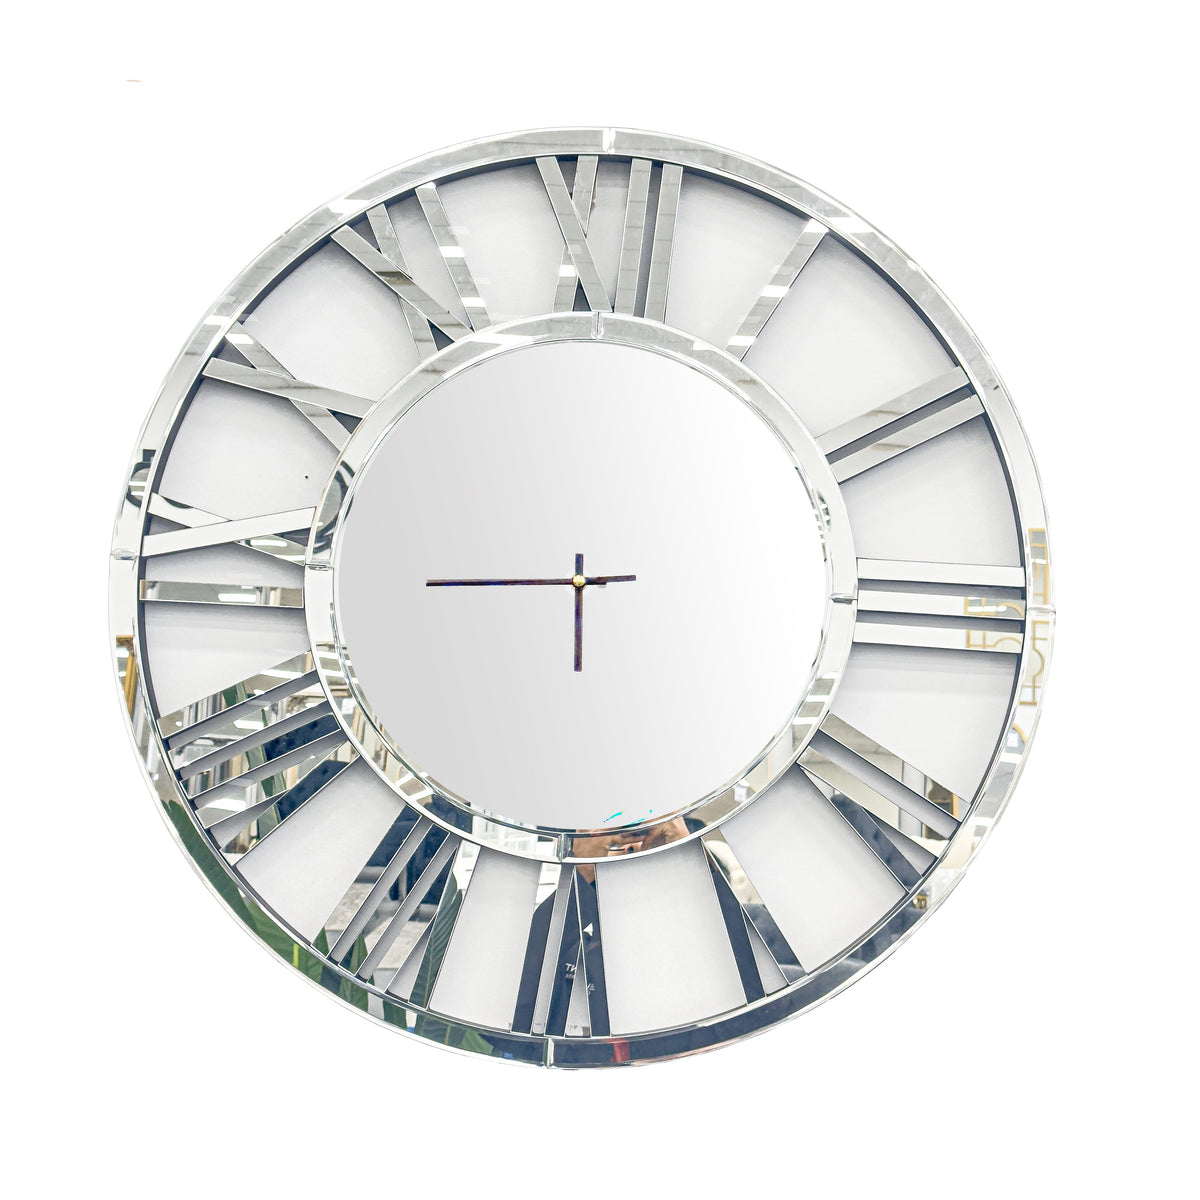 Decorative Wall Clock in Silver - Large - Notbrand